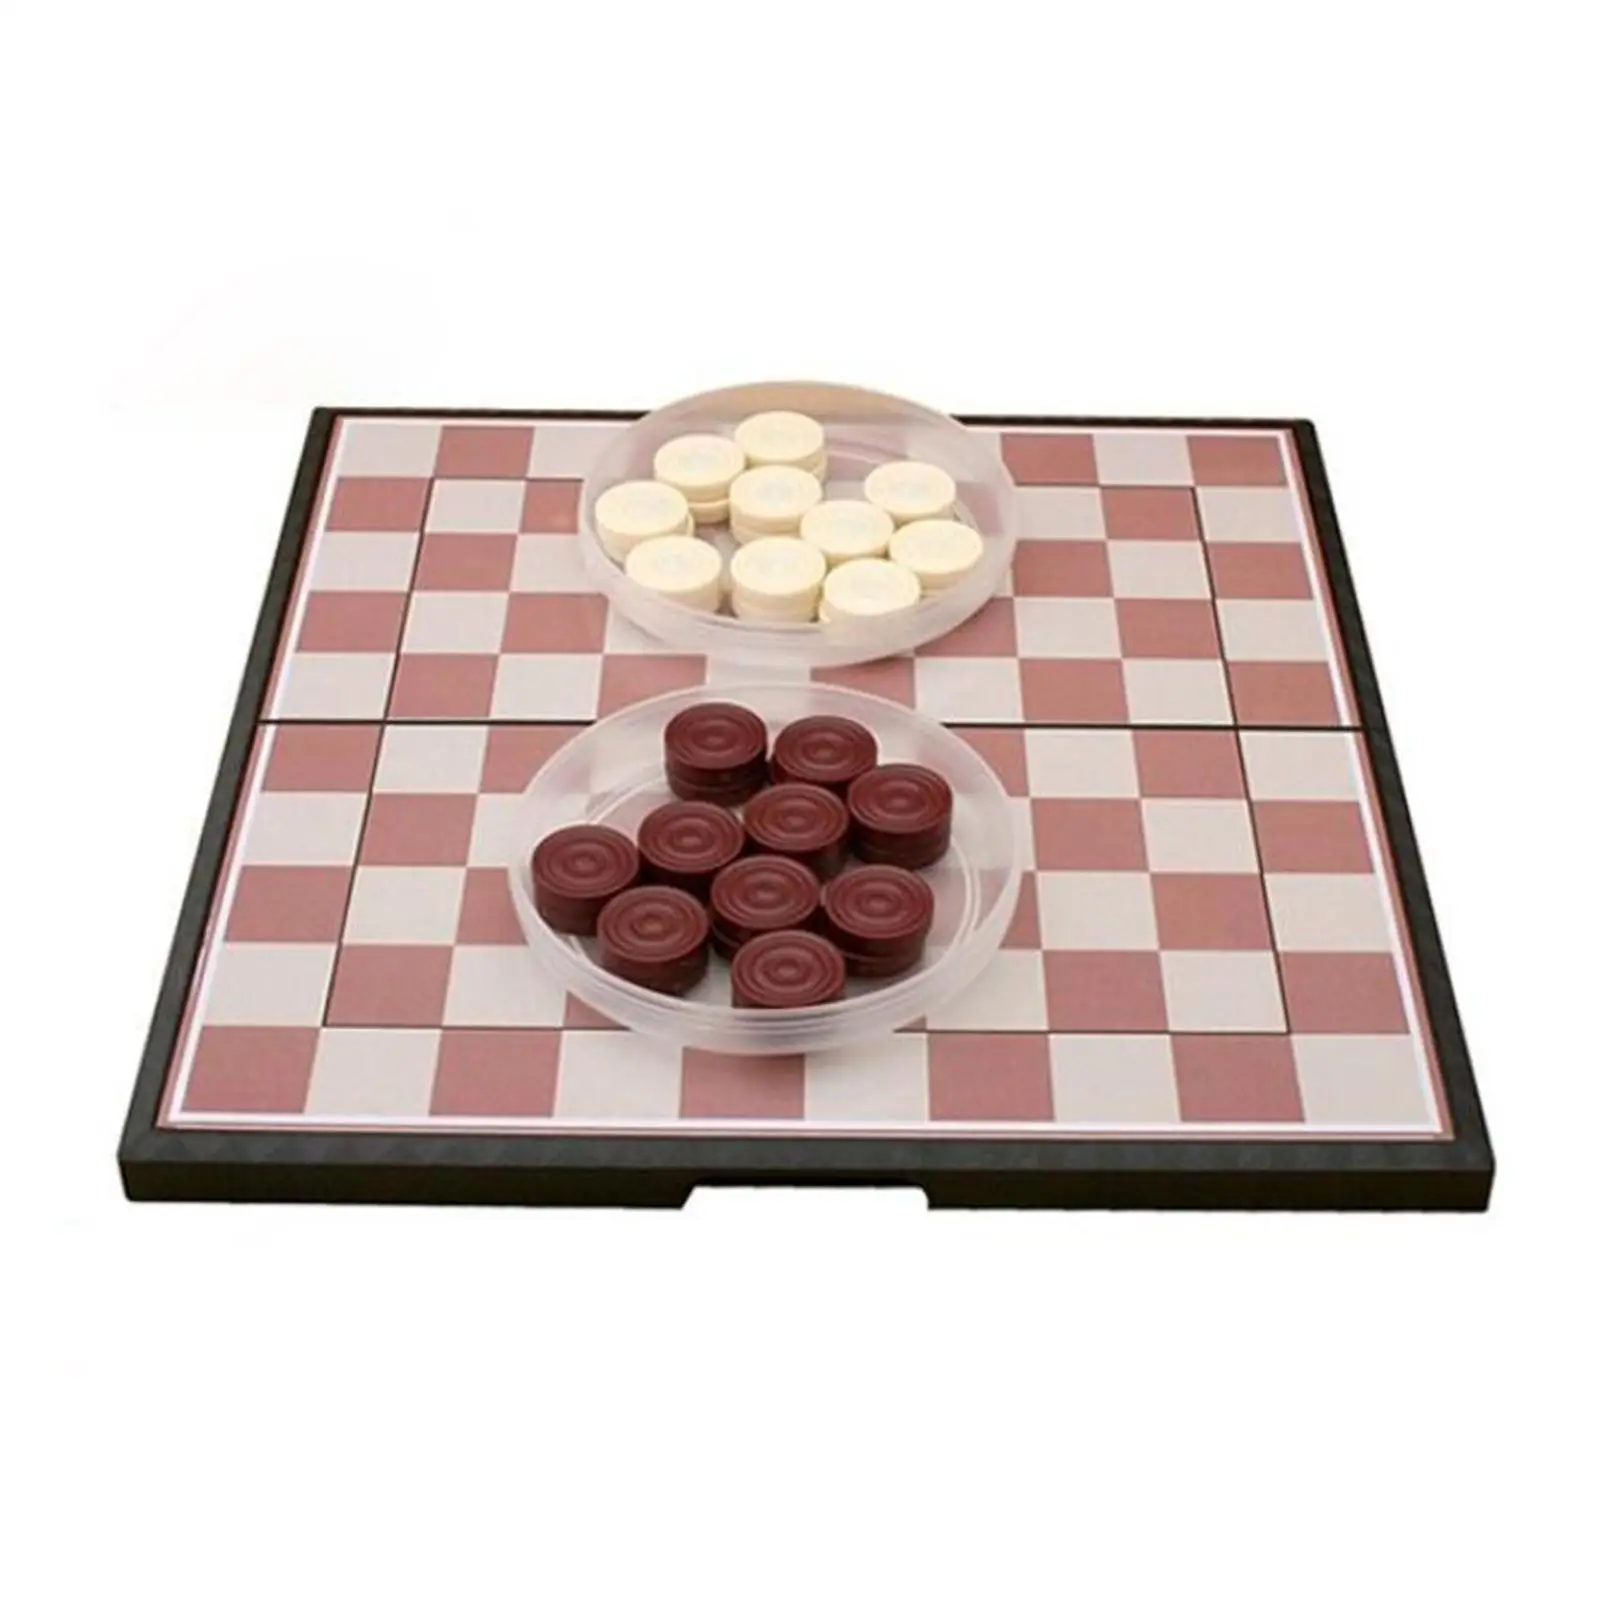 High quality Checkers Board Game Set Educational Toys Traditional for Kids